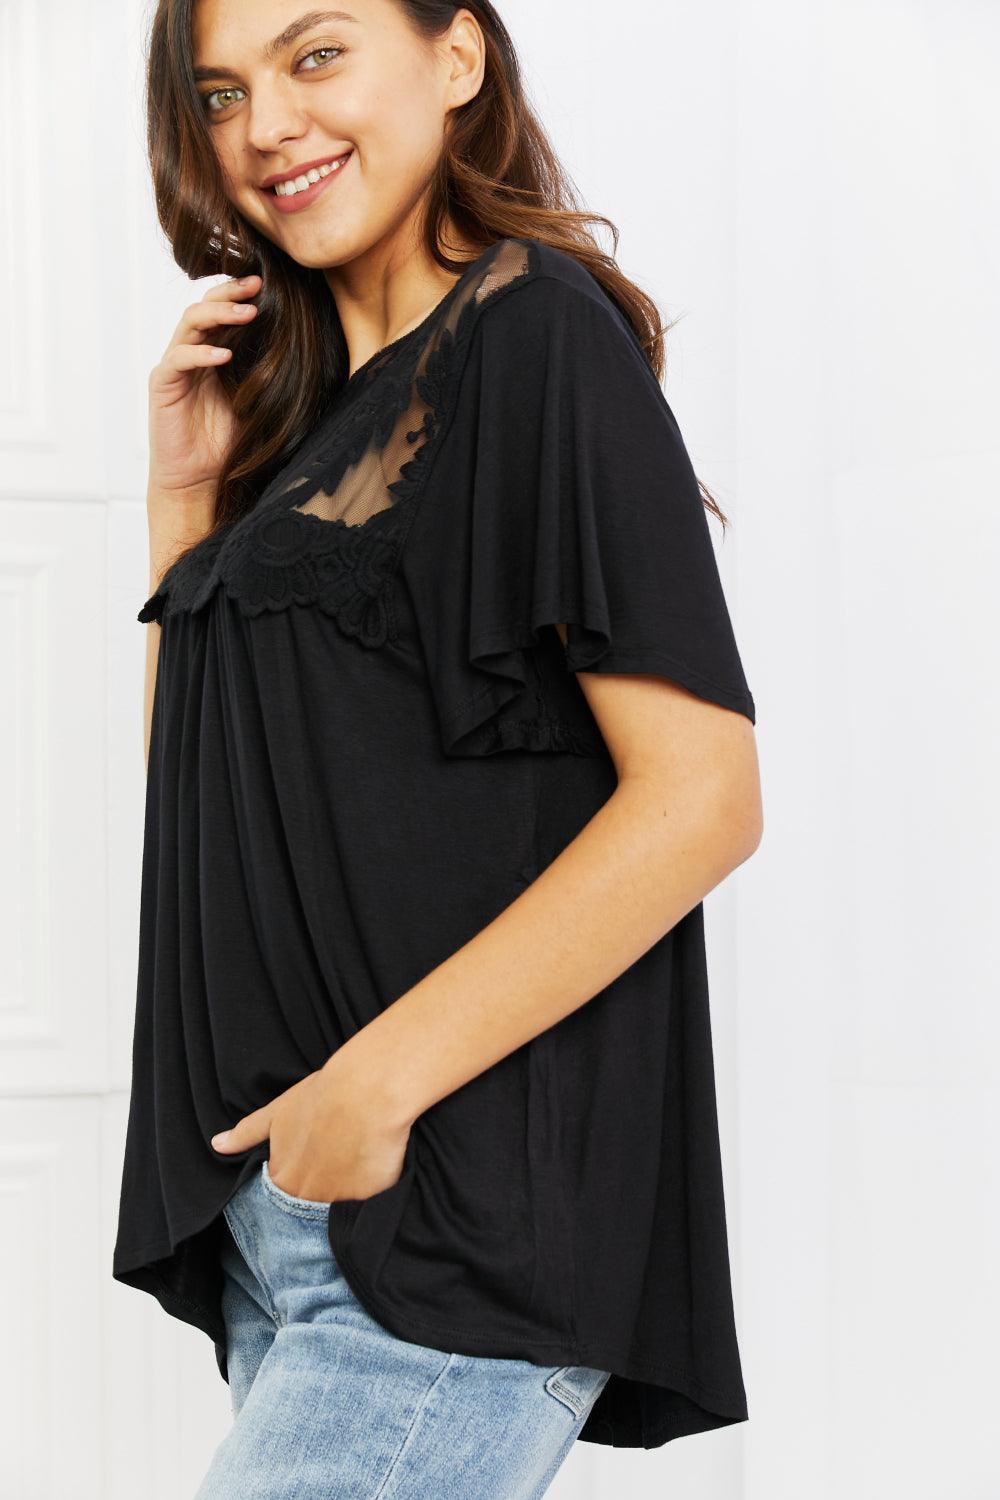 Culture Code Ready To Go Full Size Lace Embroidered Top in Black - Glamorous Boutique USA L.L.C.